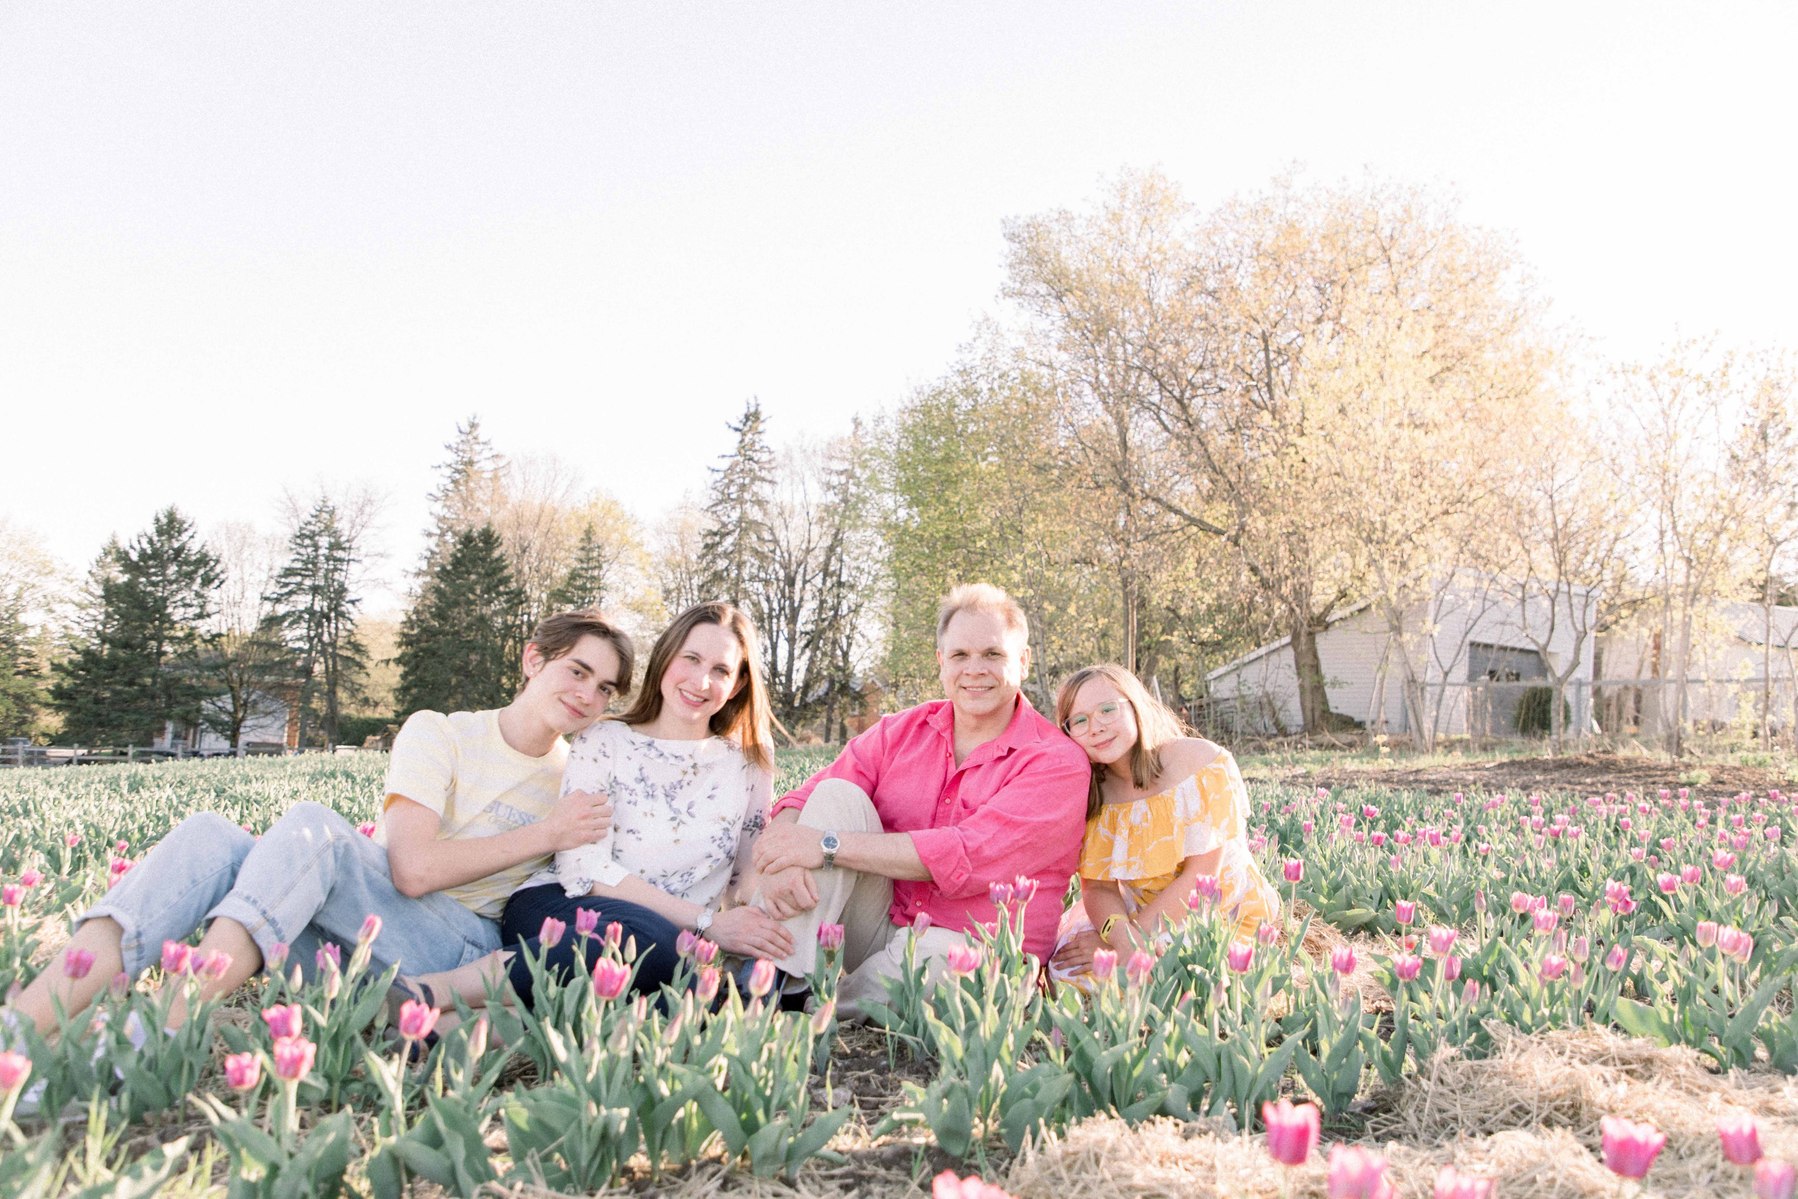 Portrait of a family of four sitting down in a tulip field looking at the camera and smiling. Vankleek Hill Portrait Photographer, L'Orignal, Champlain, Prescott-Russell, Family Photography, Candid Photography, Emily VanderBeek Photography.